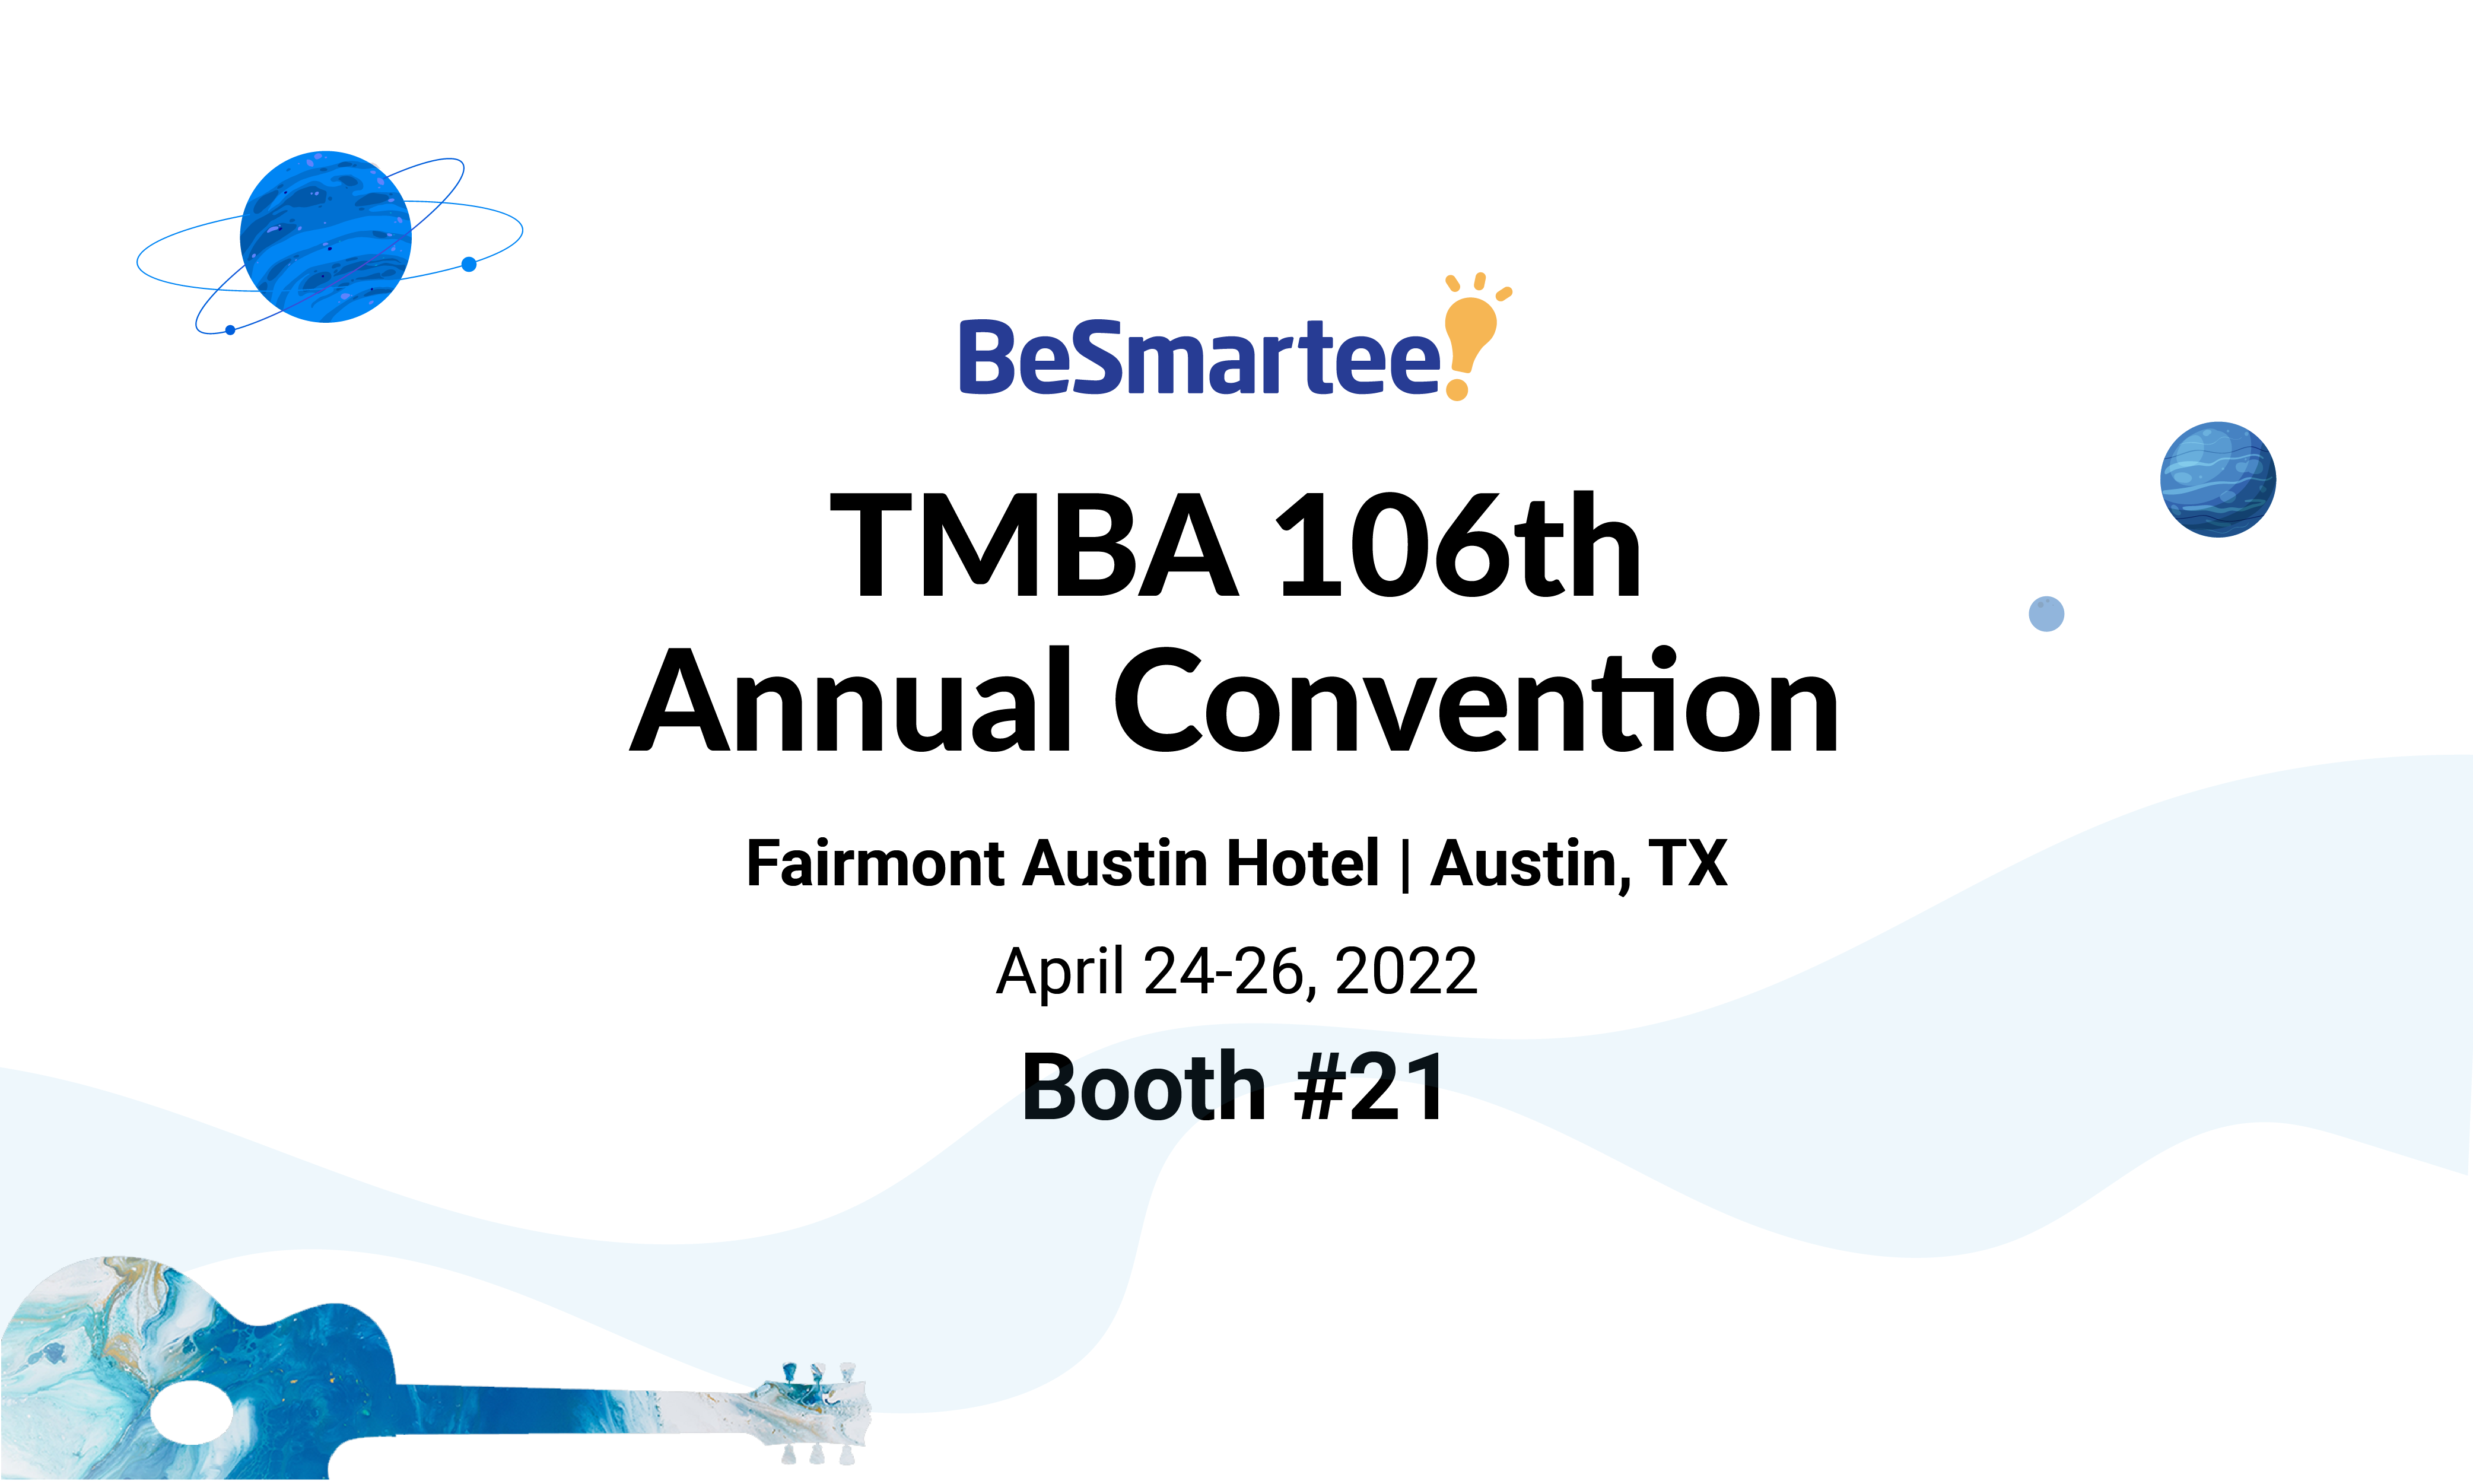 BeSmartee Interviews Mortgage Industry Experts at TMBA Annual 2022